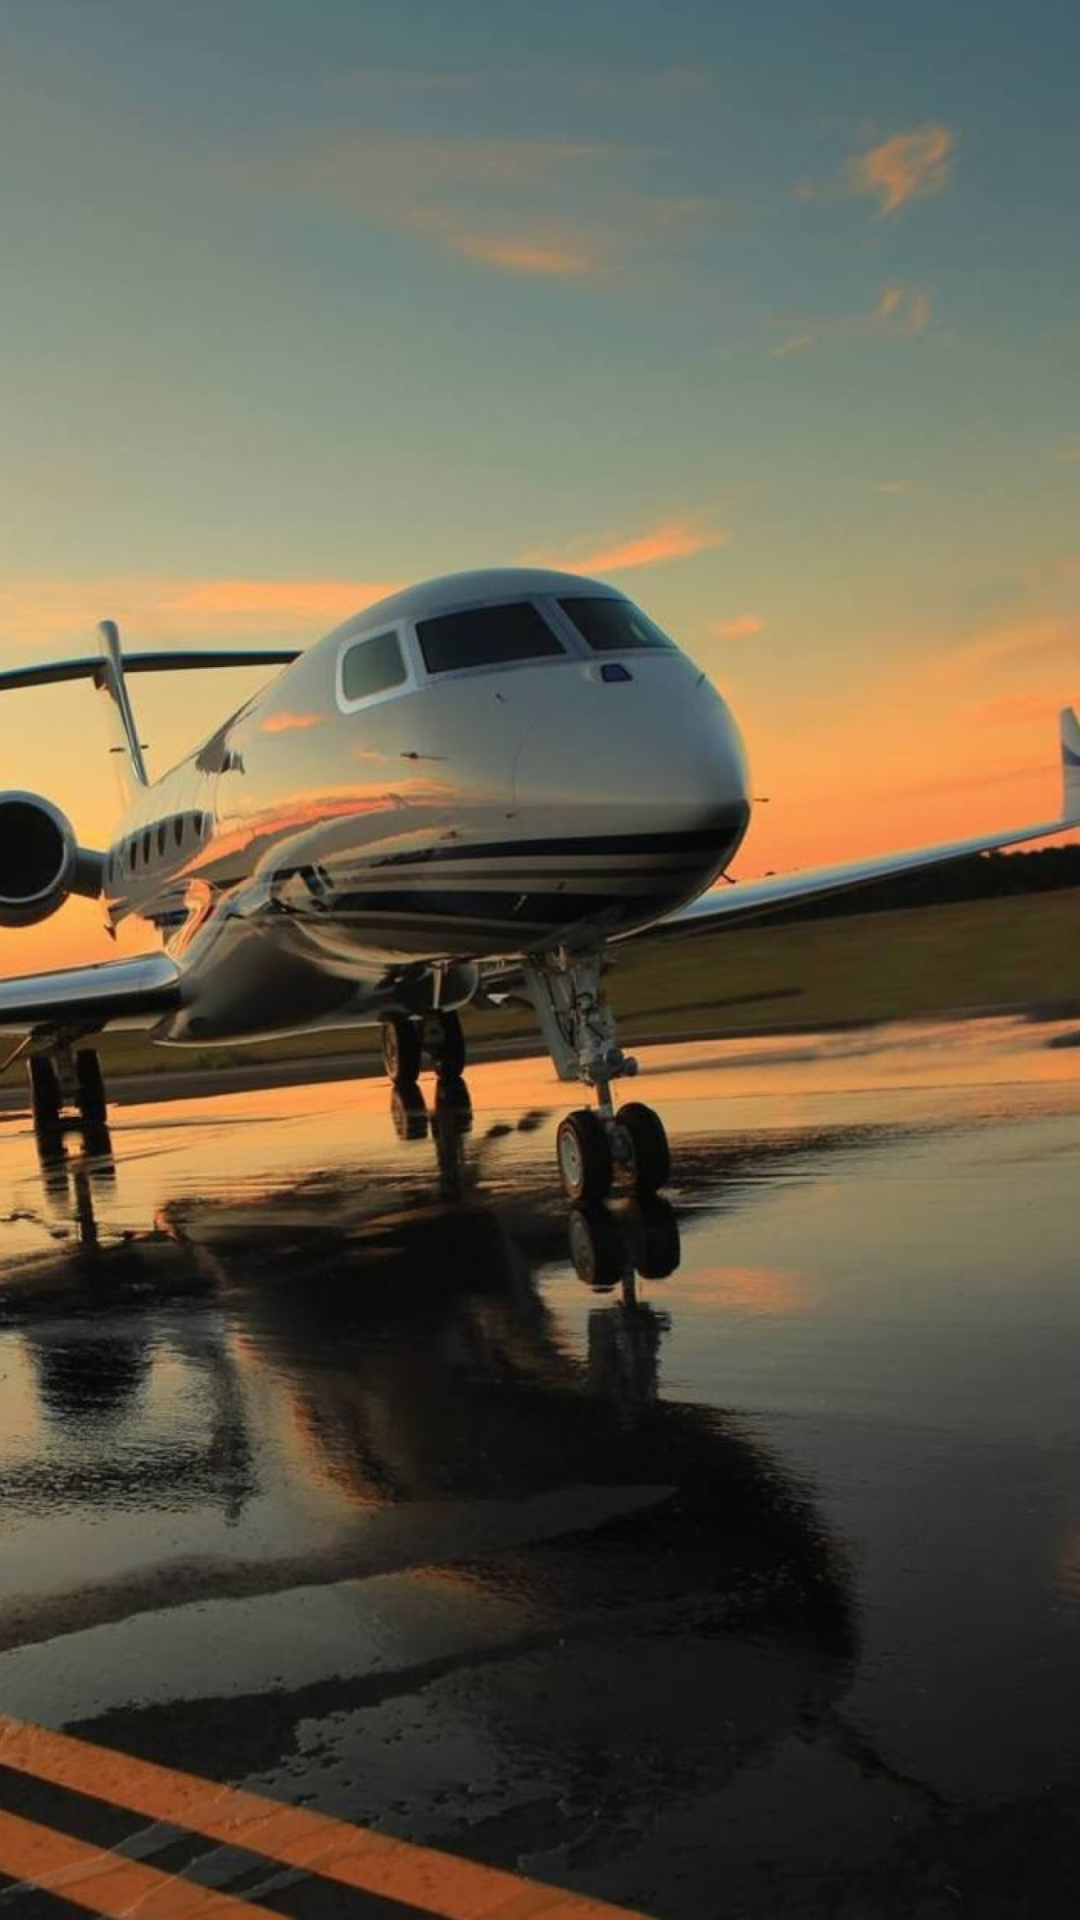 Private Jet Wallpaper For Iphone 6 Plus - Chartering Services Air - HD Wallpaper 